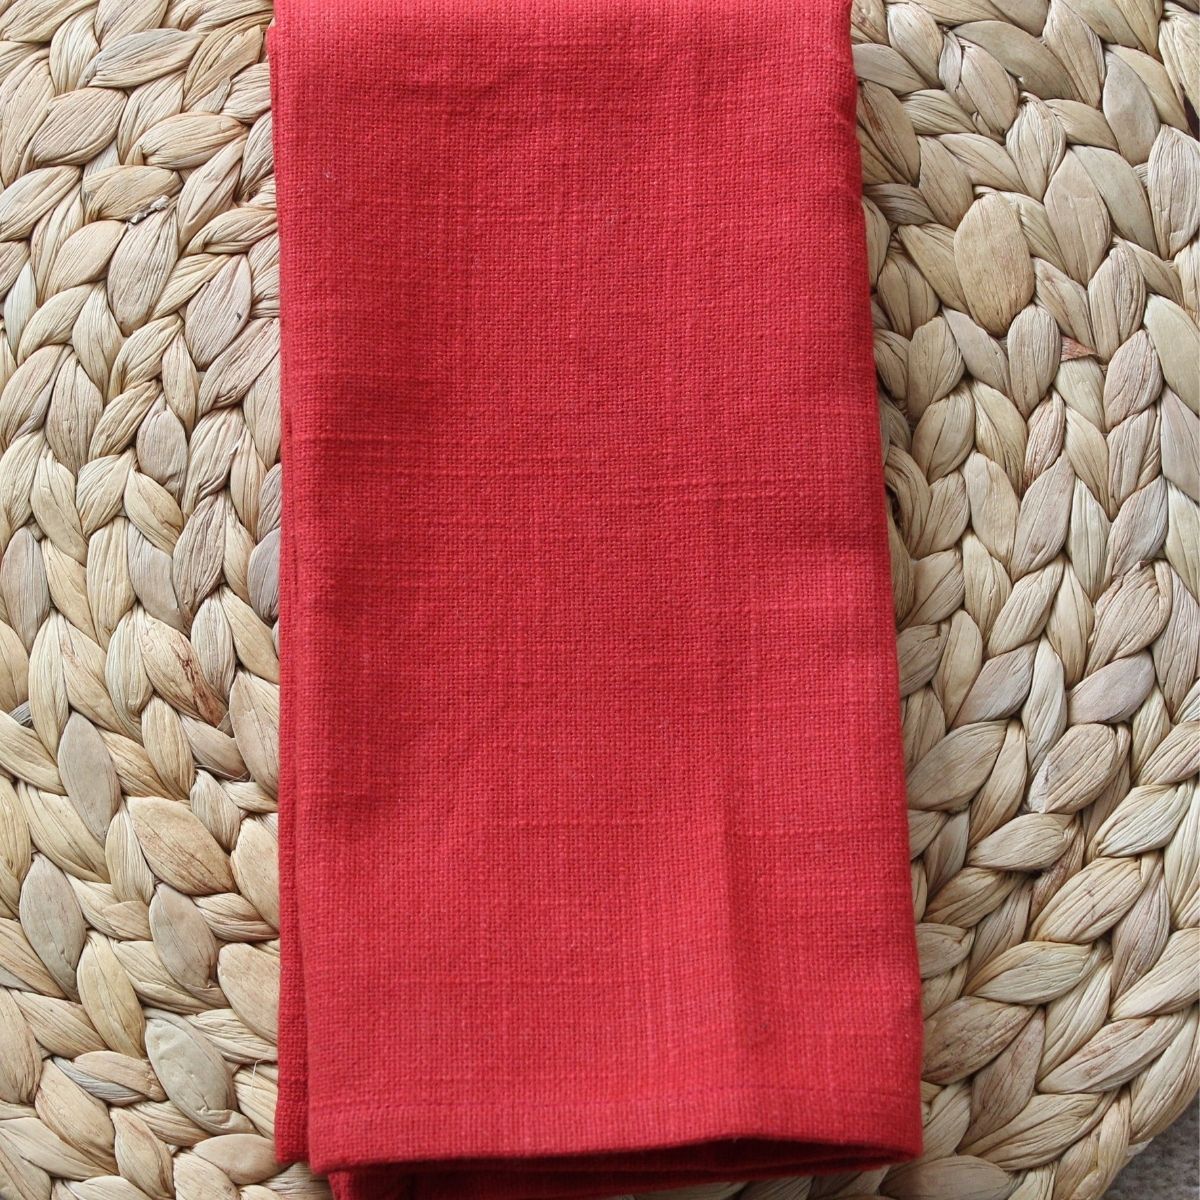 Red solid colour cotton napkins - set of 4